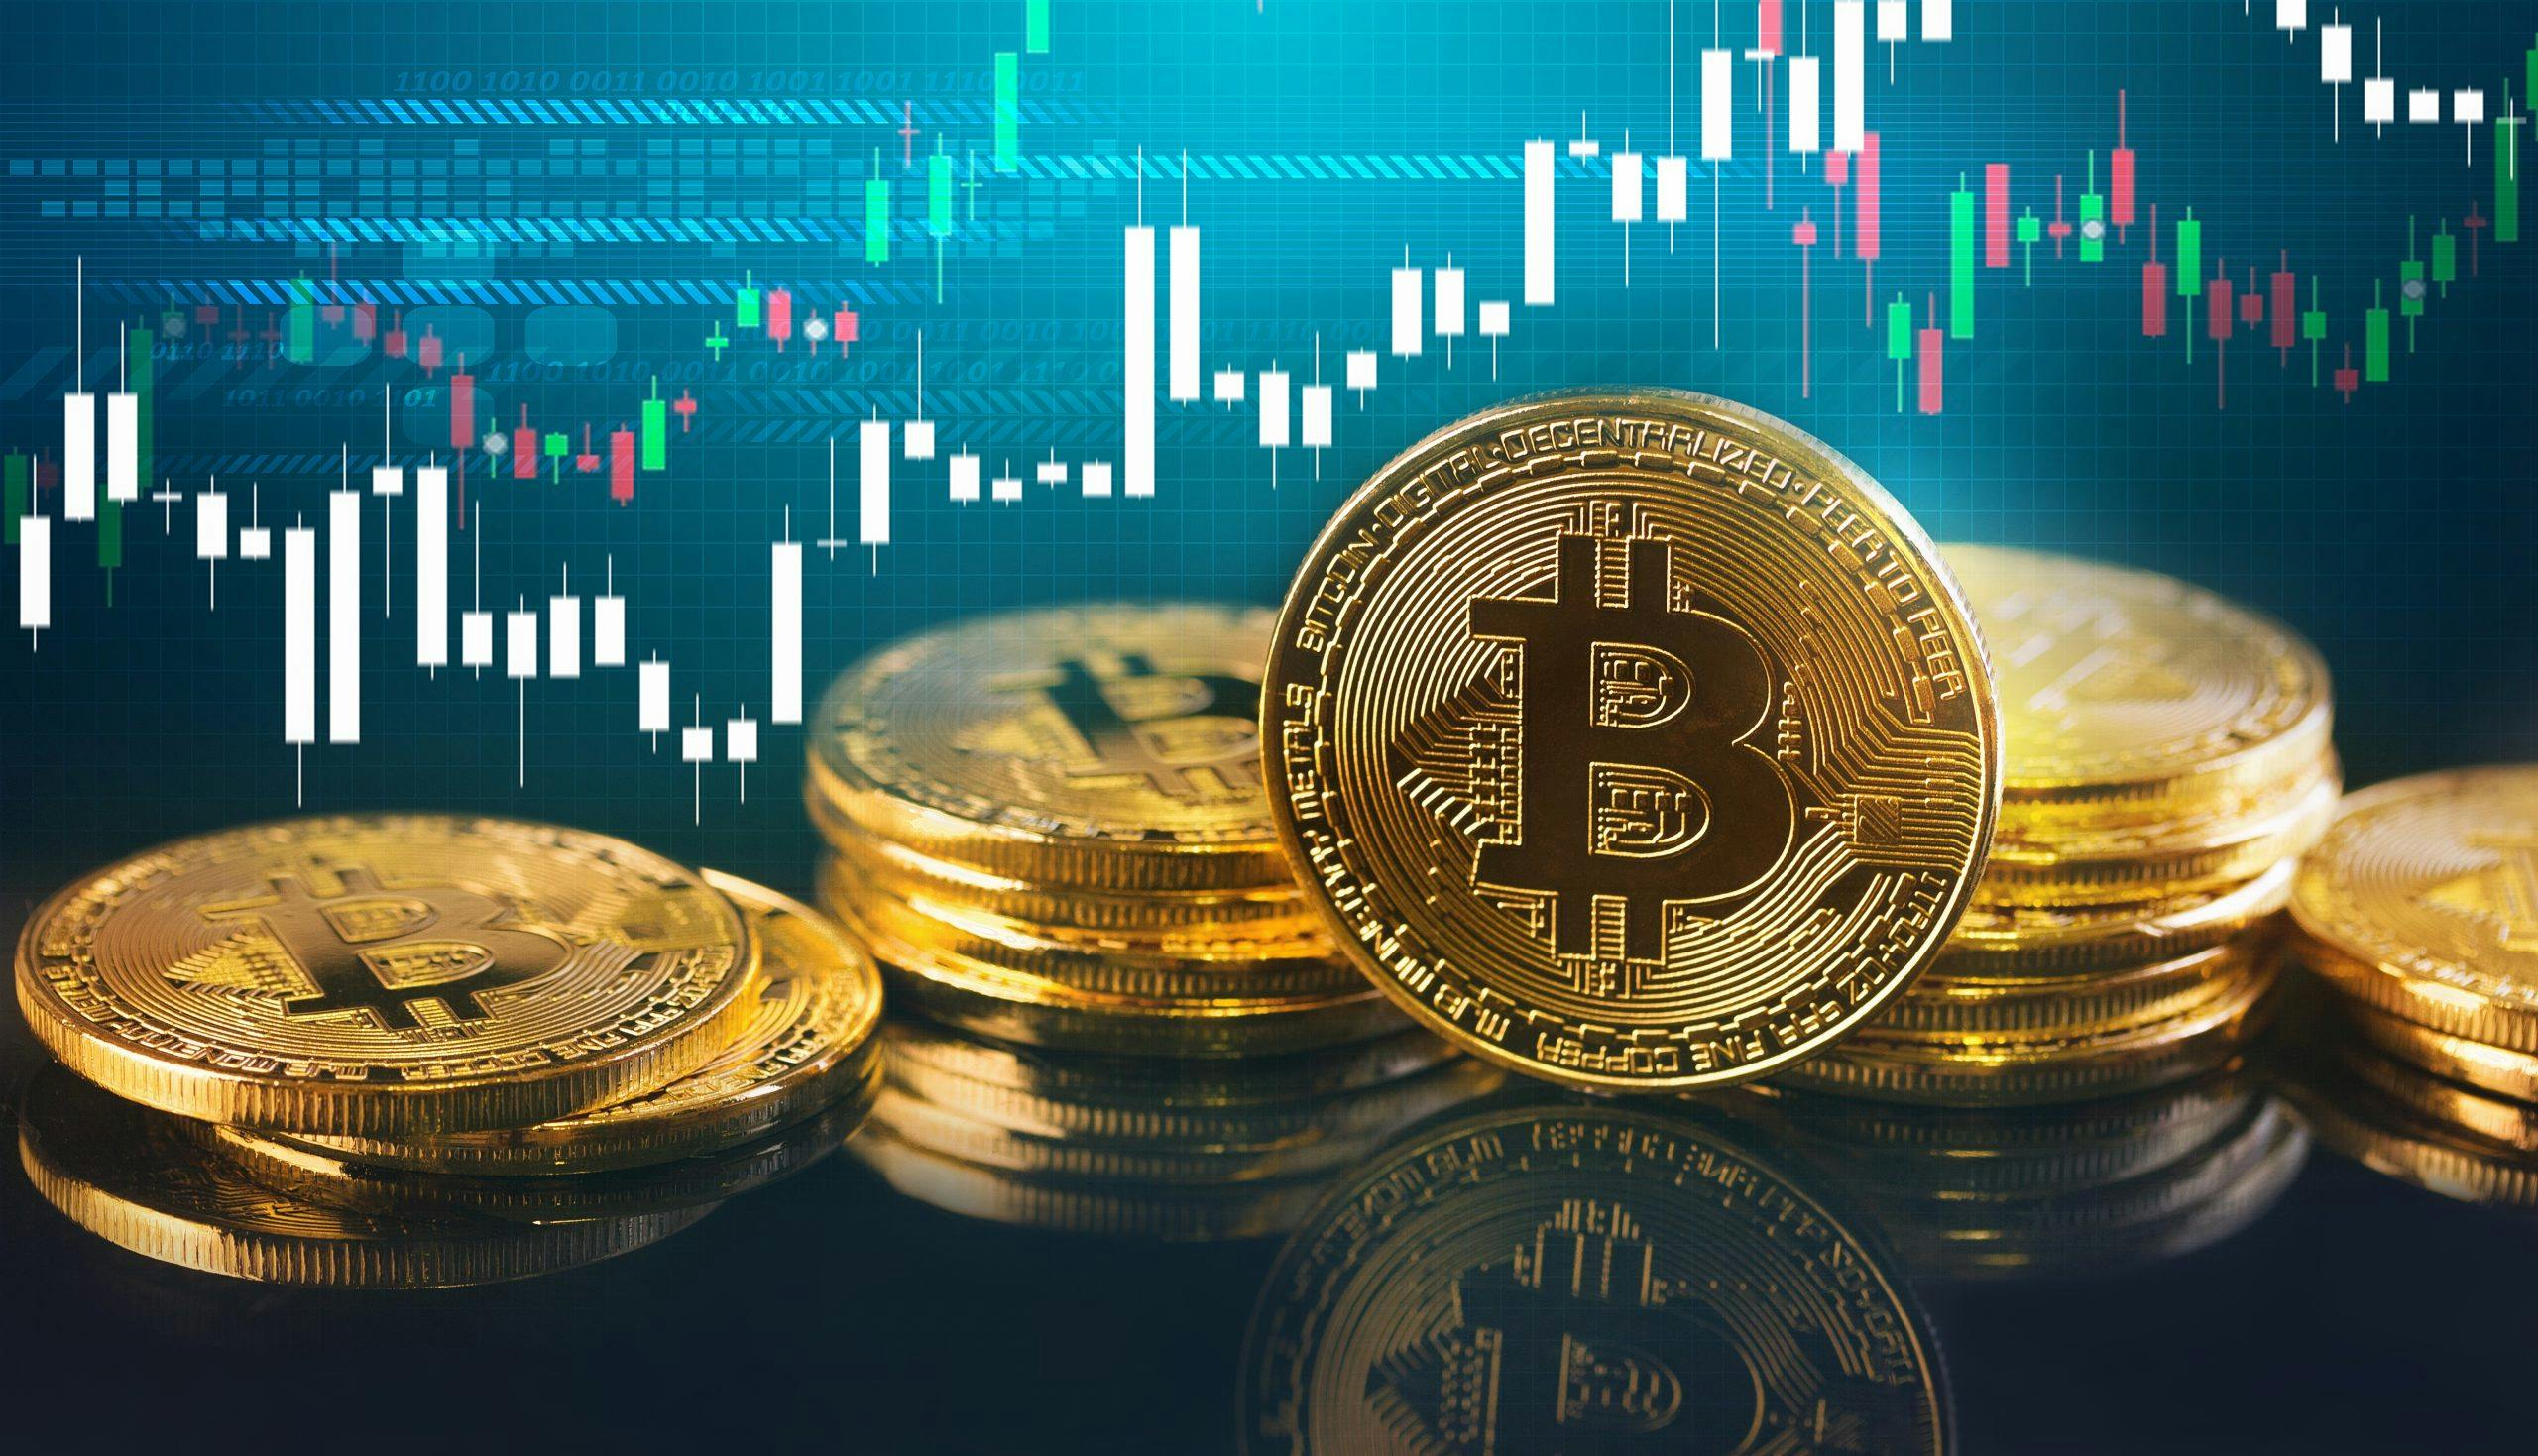 Bitcoin and Cryptocurrency – The Future, Or Just A Passing Phase?